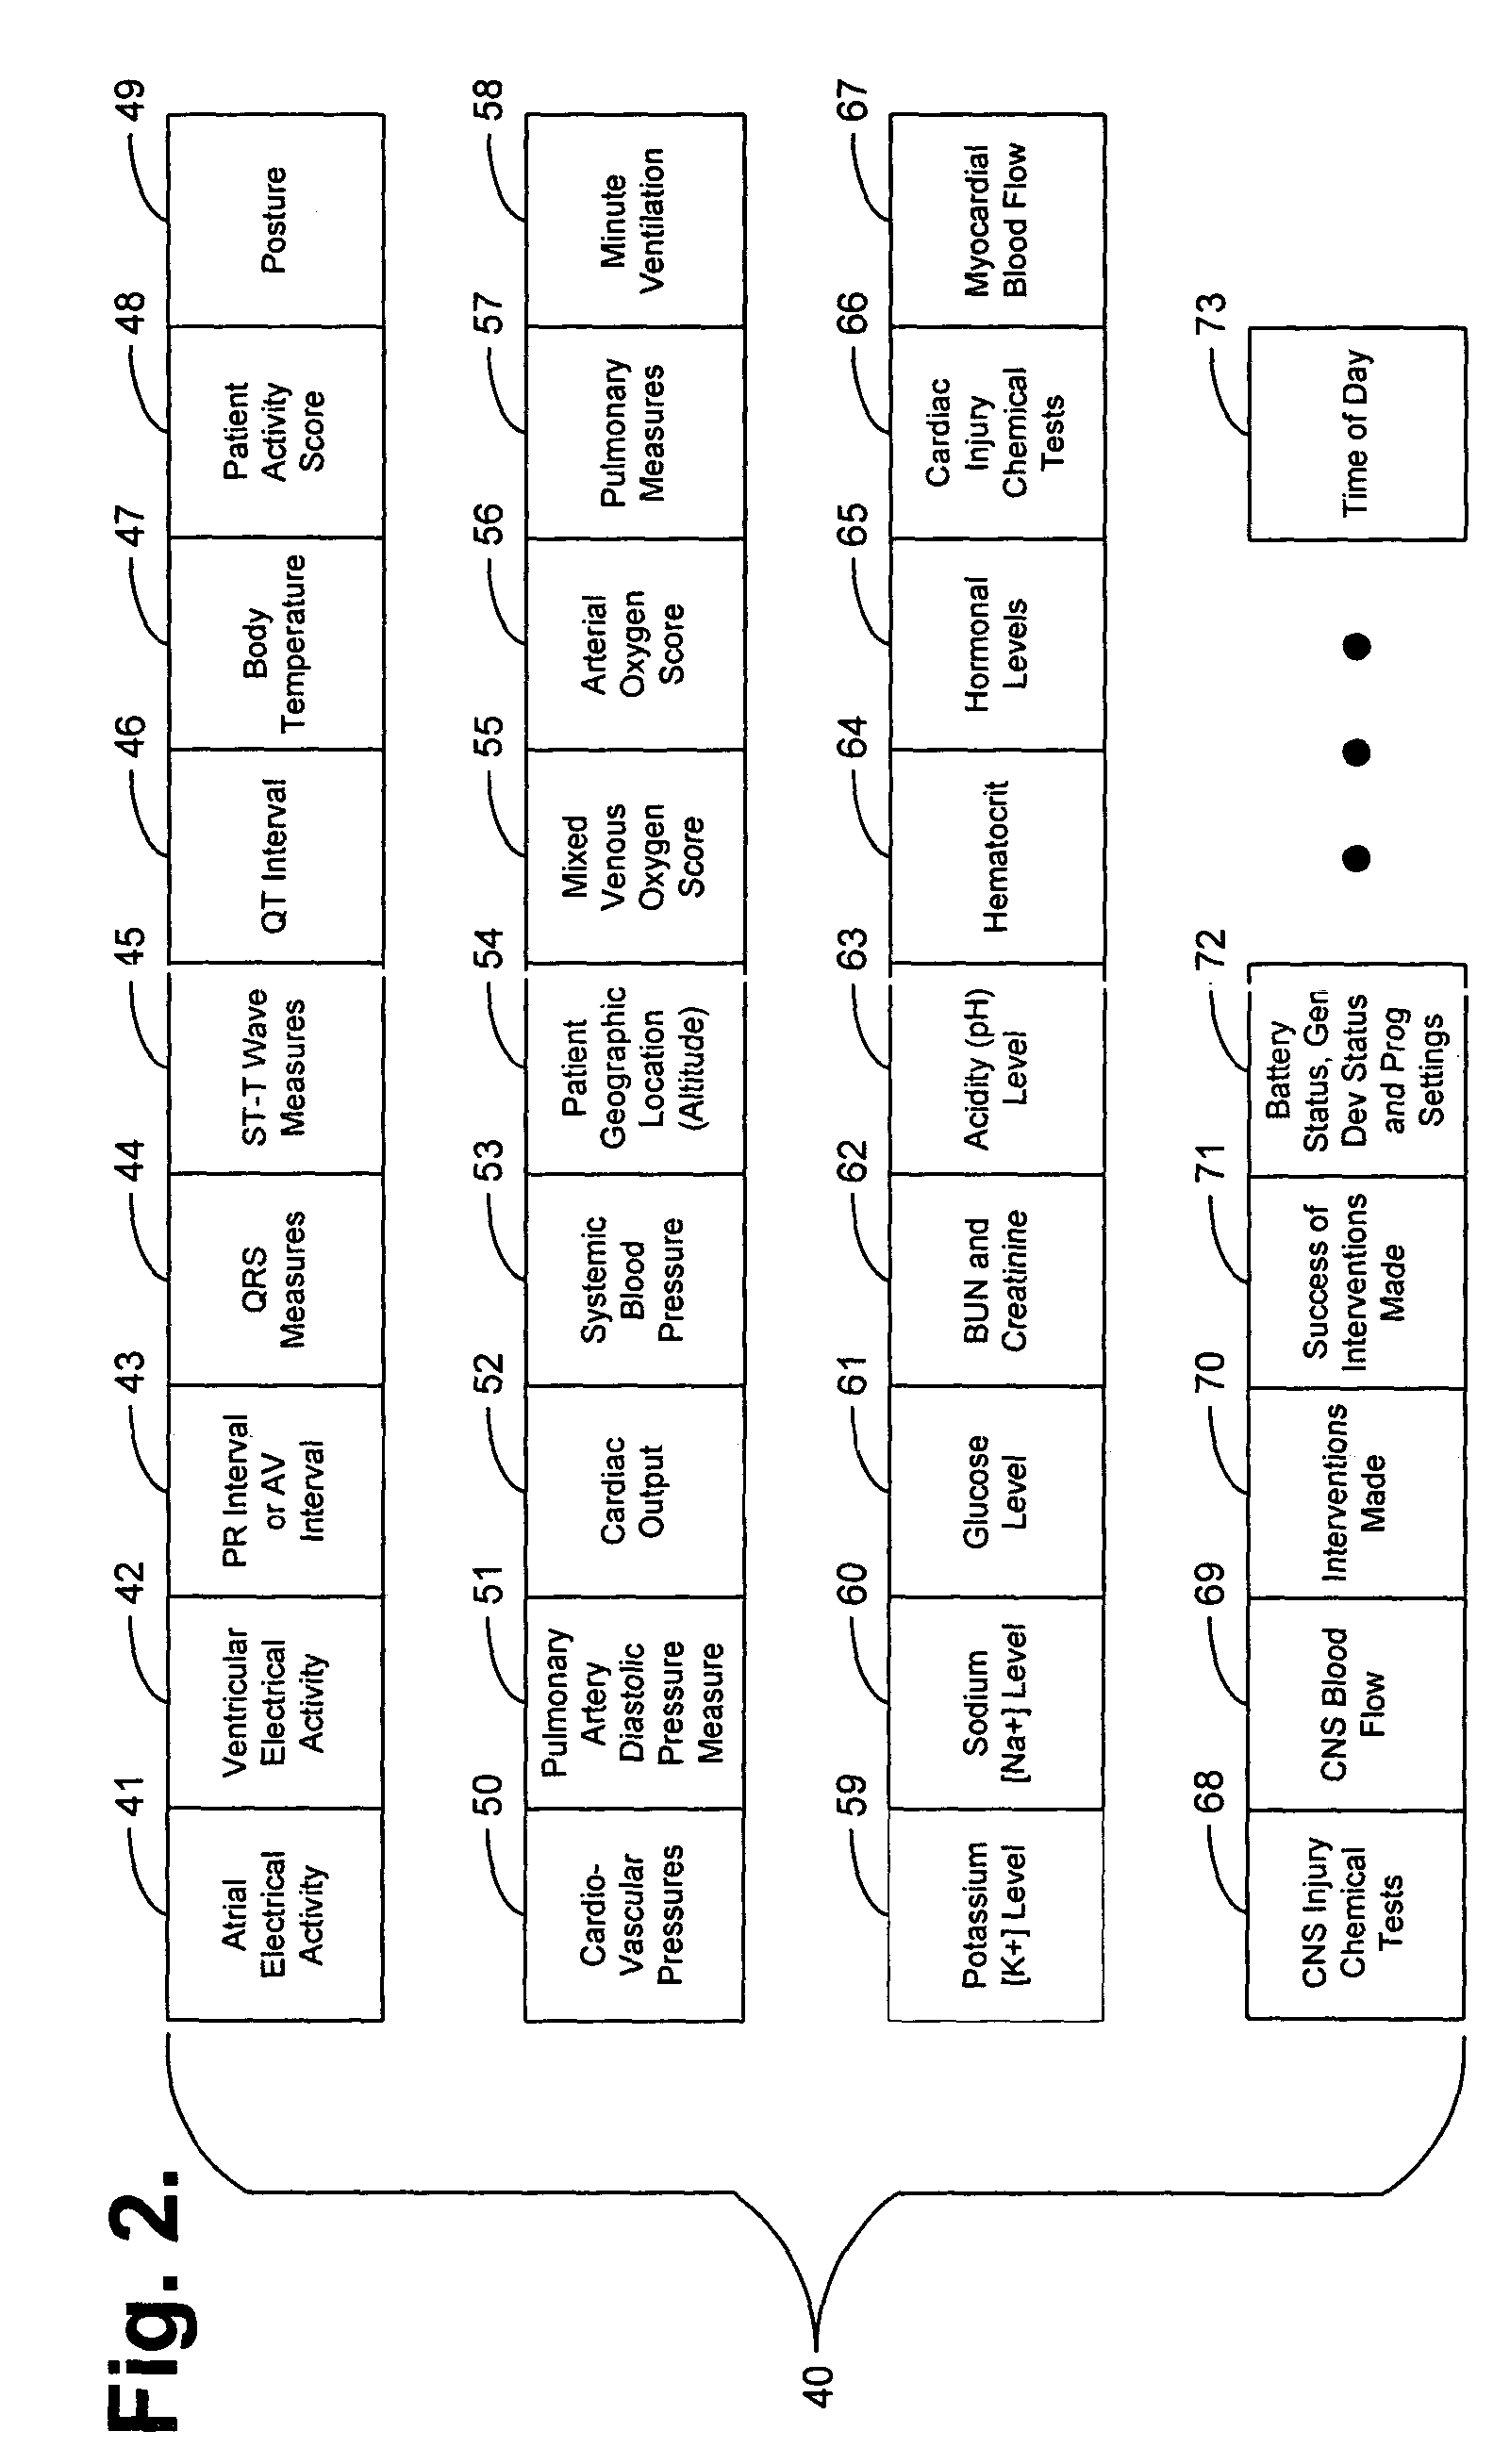 System and method for diagnosing and monitoring congestive heart failure